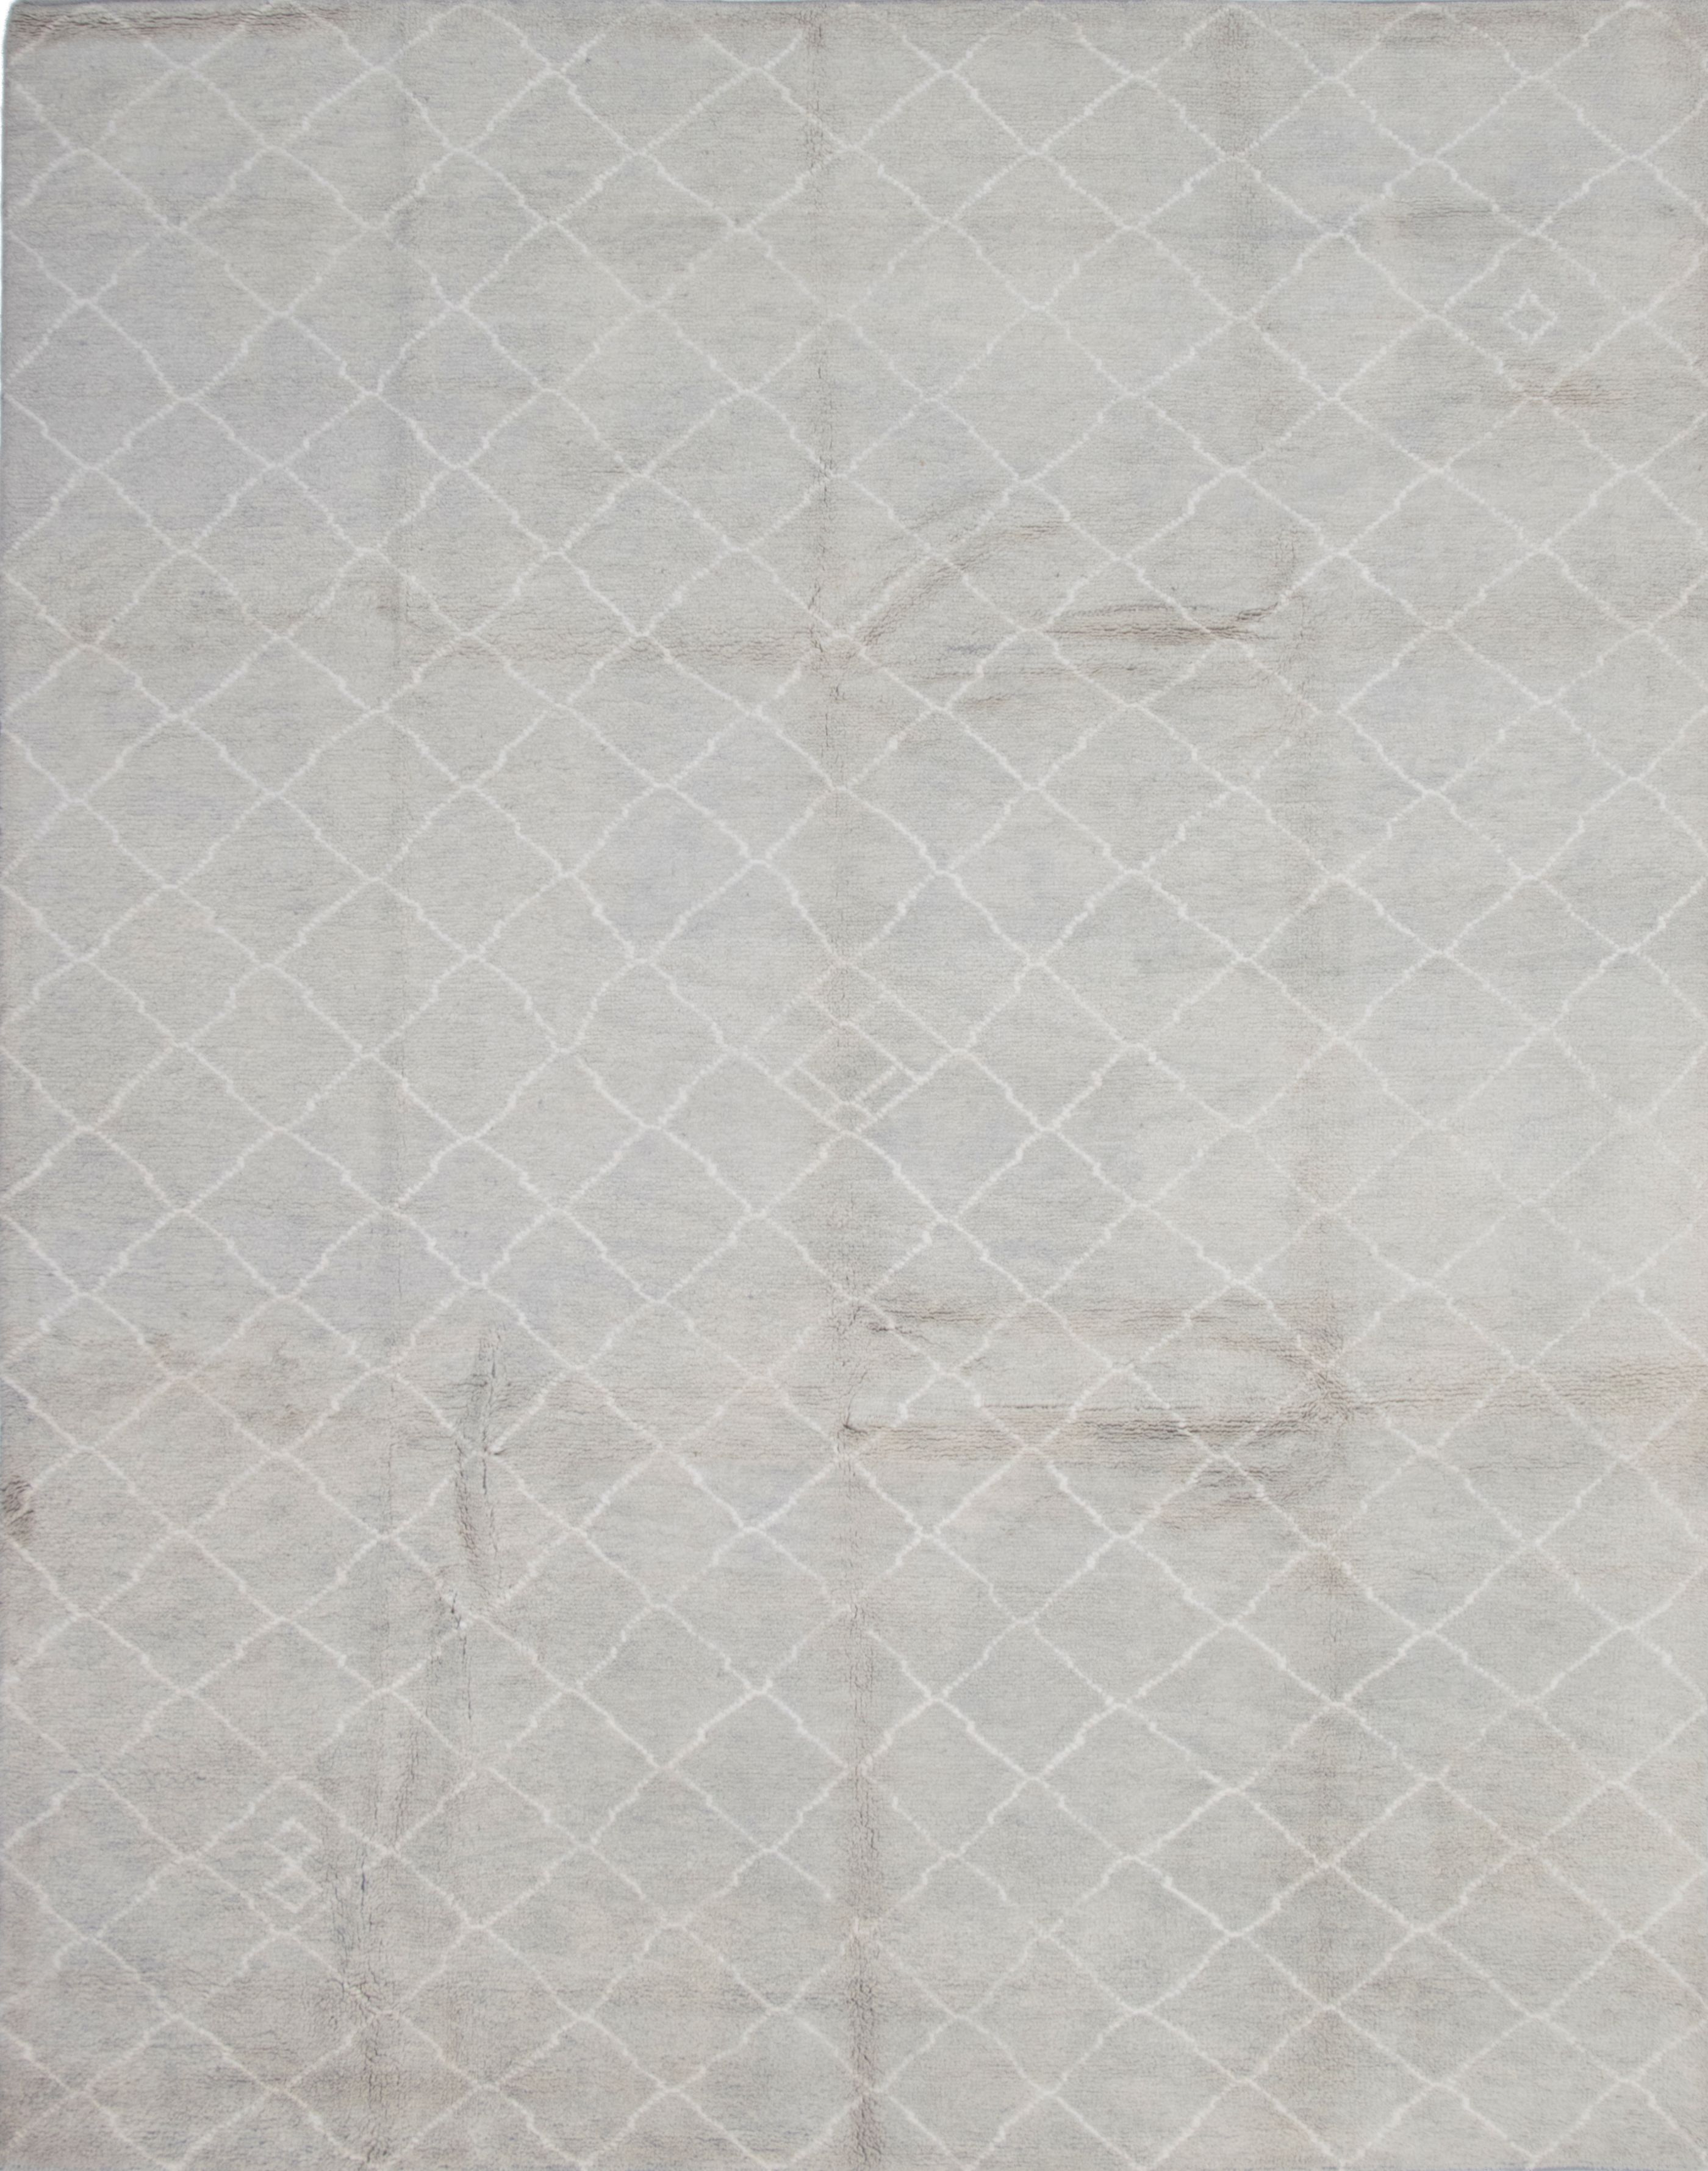 Hand-knotted Arlequin Light Grey Wool Rug 9'4" x 11'10" Size: 9'4" x 11'10"  